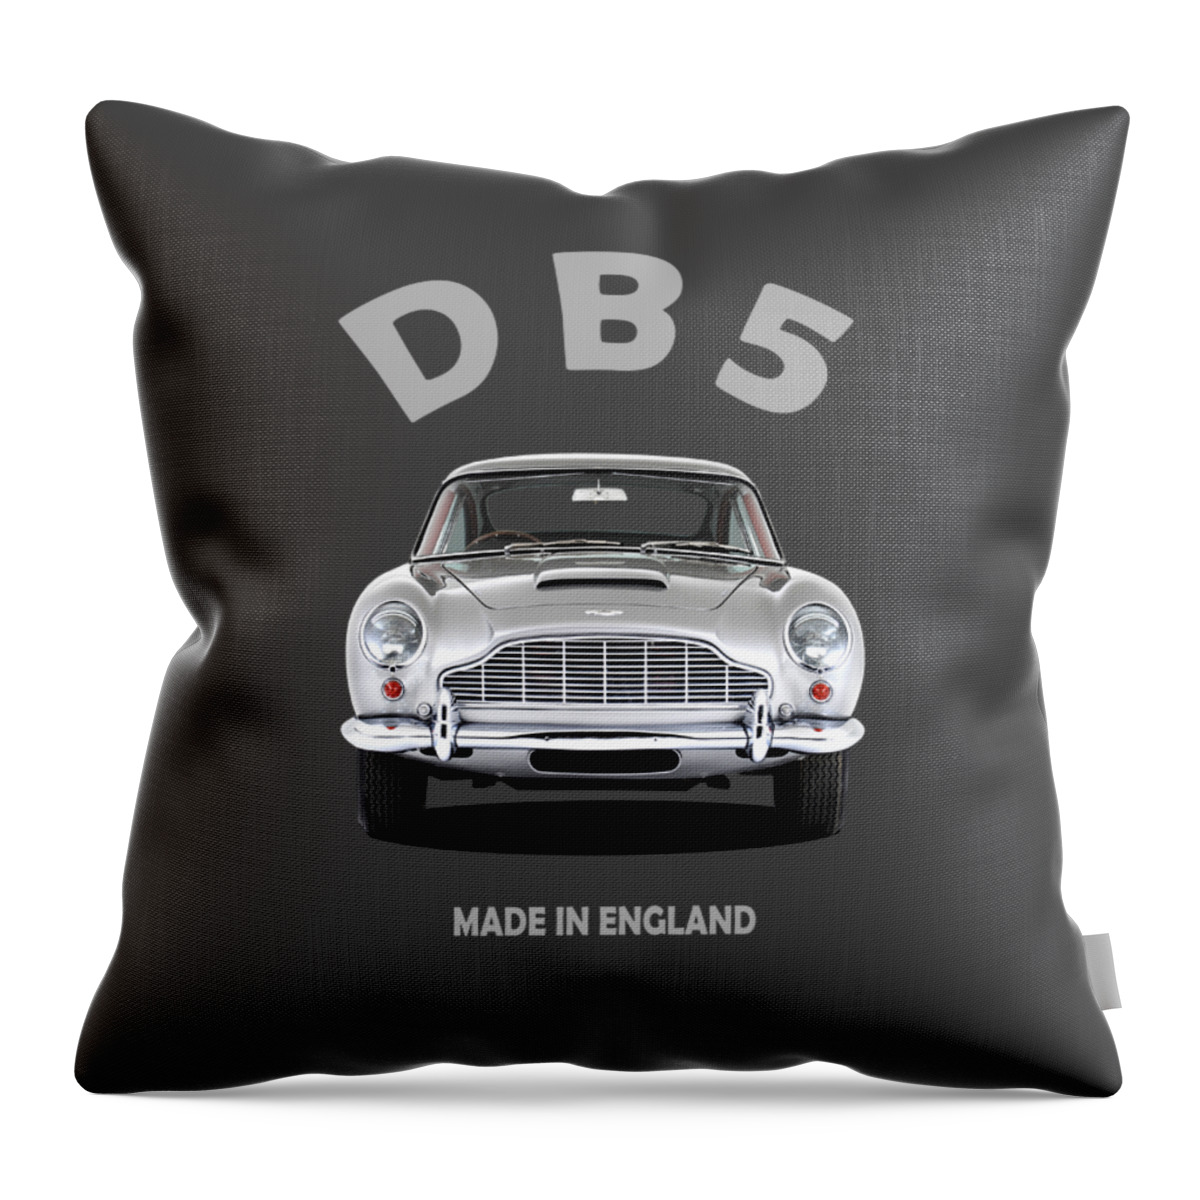 Aston Martin Db5 Throw Pillow featuring the photograph The DB5 Face by Mark Rogan